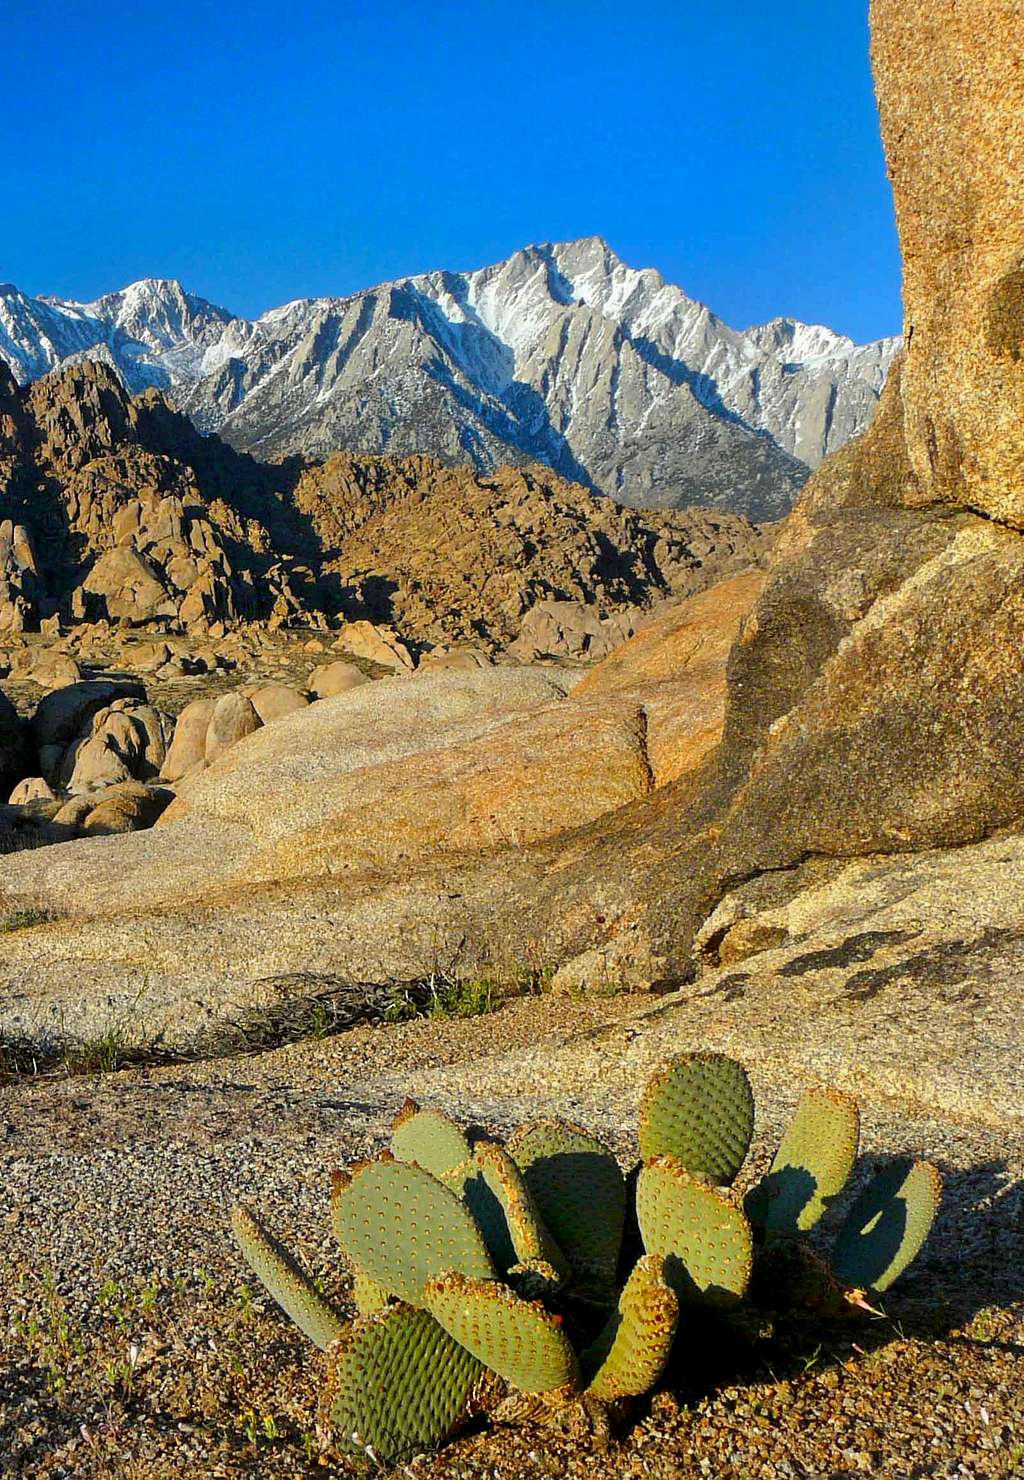 Lone Pine Sierra from the Alabama Hills